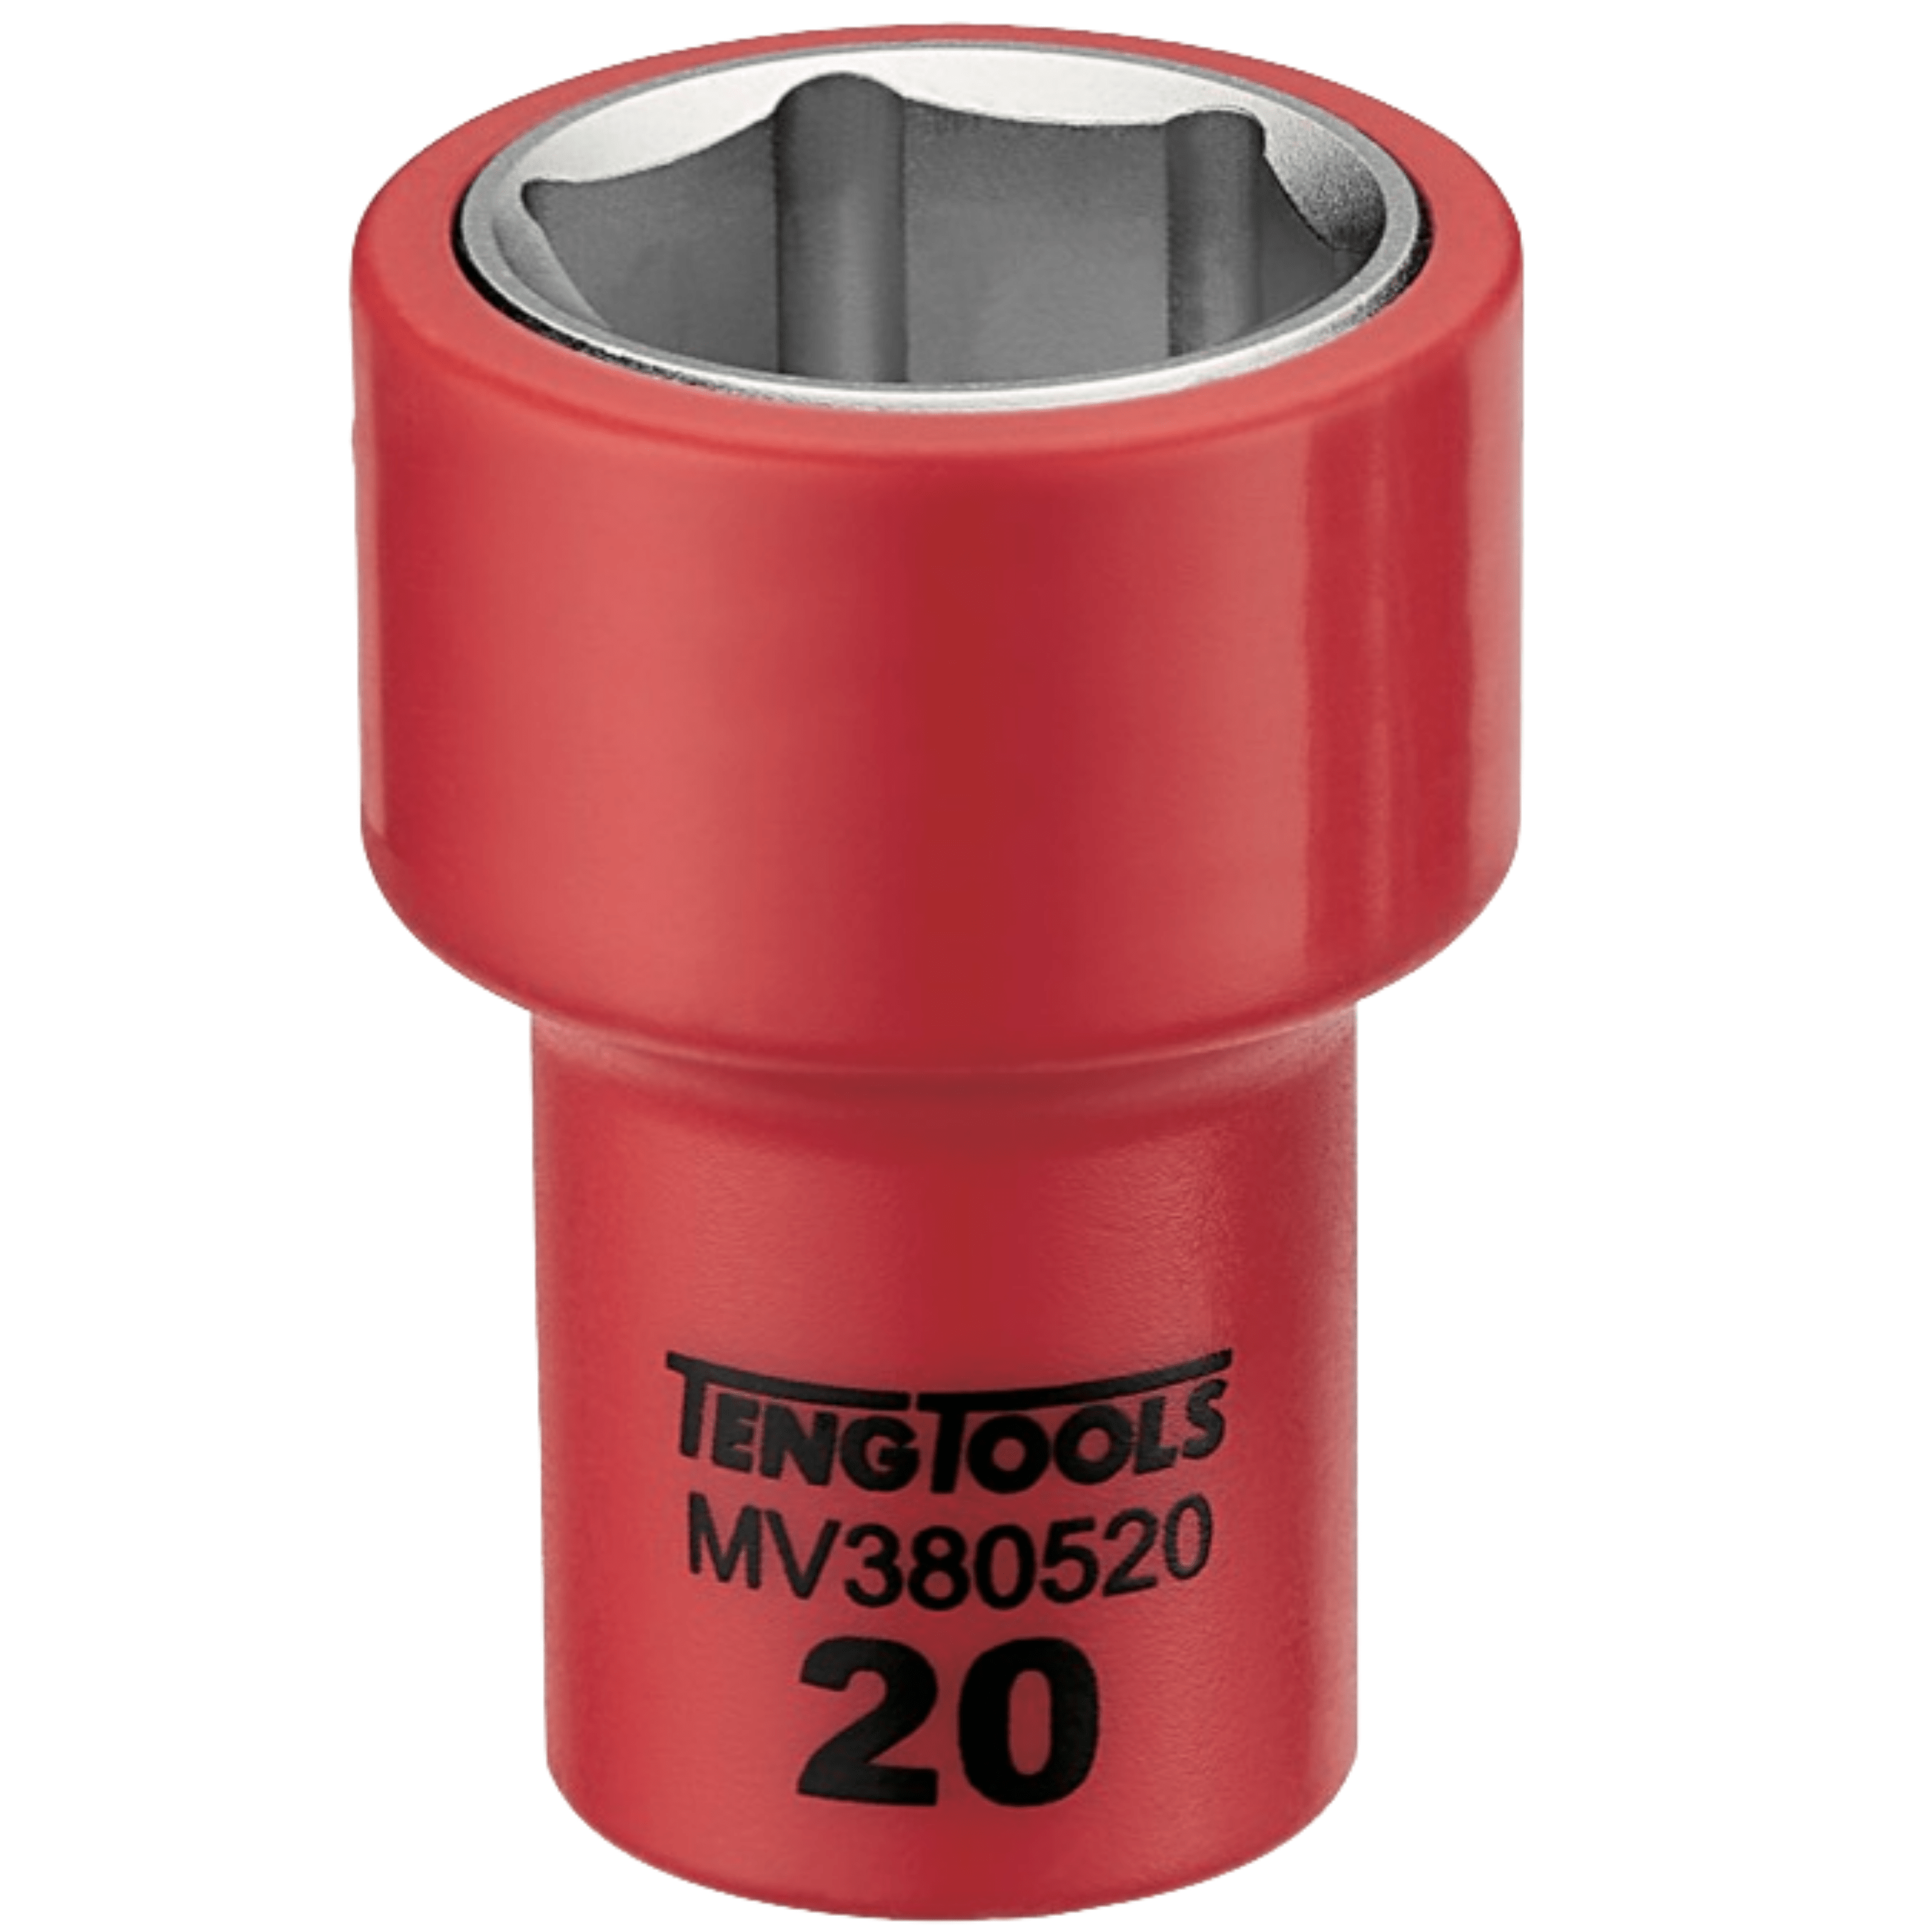 Teng Tools 3/8 Inch Drive Metric 6 Point 1000 Volt Shallow Insulated Sockets - 15mm